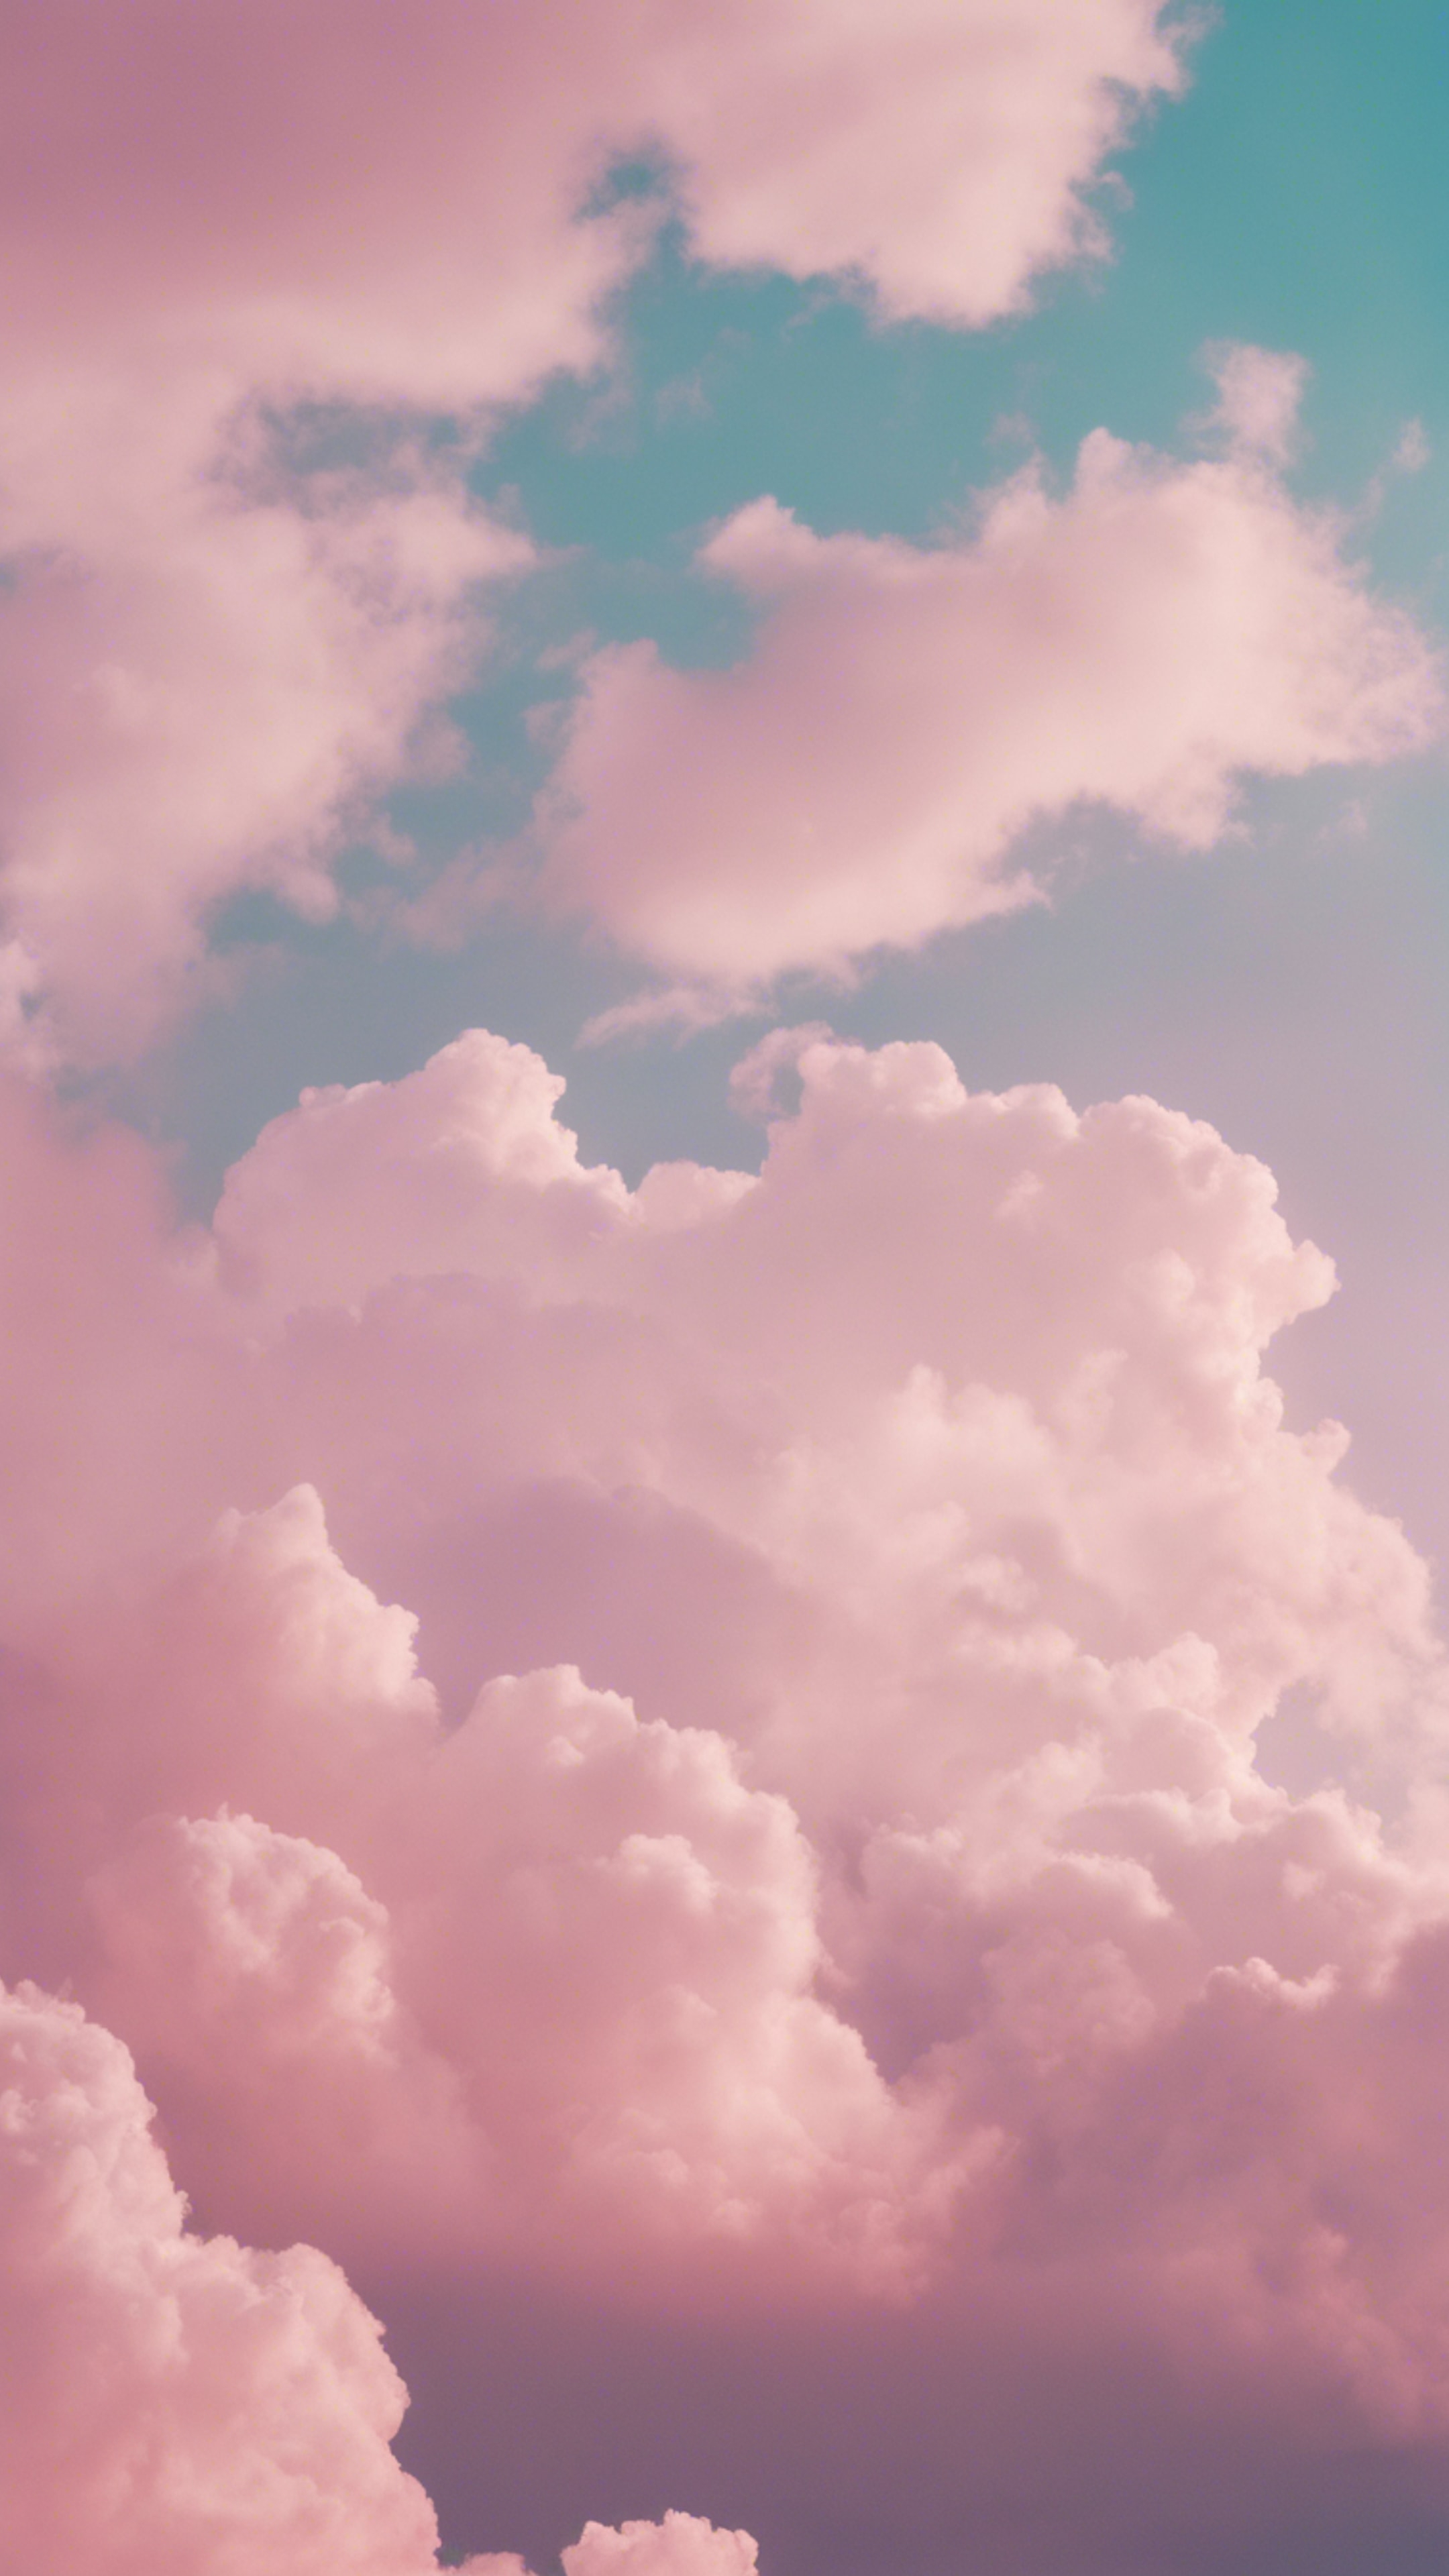 A surreal sky with a mix of pastel tones influenced by Y2K digital aesthetic. ផ្ទាំង​រូបភាព[d53cf796167a434cb2de]